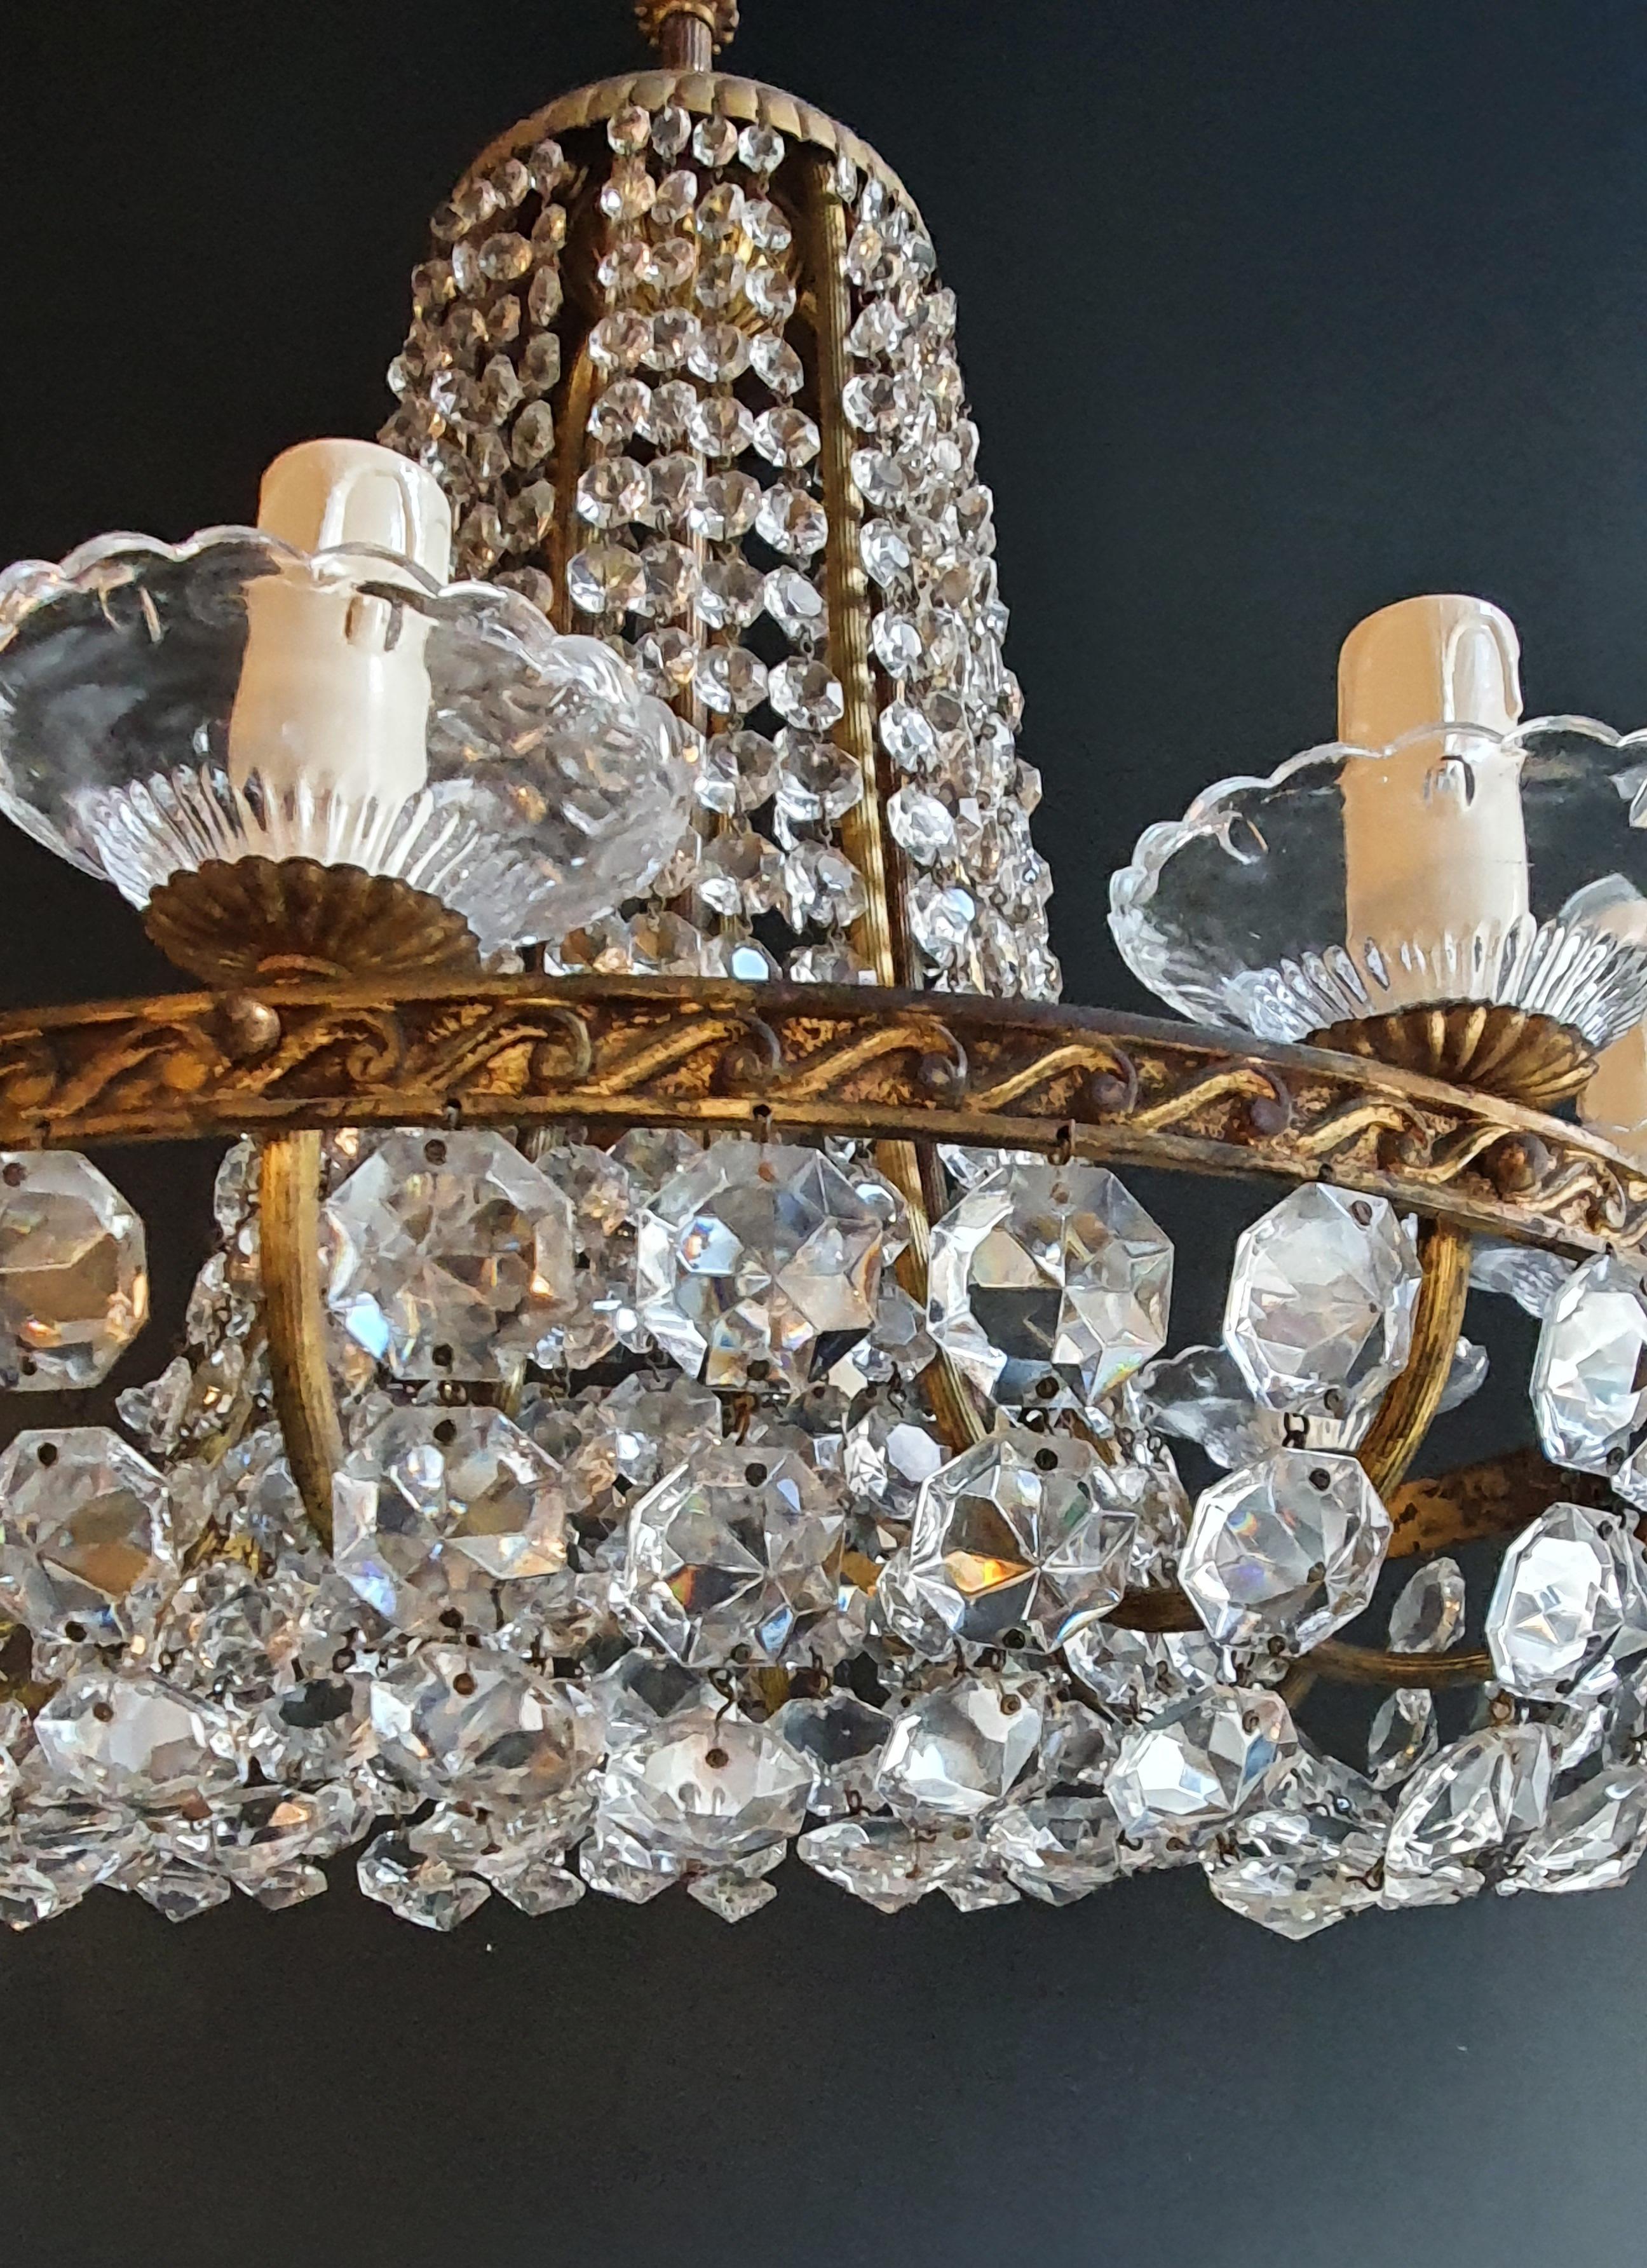 Old chandelier with love and professionally restored in Berlin. electrical wiring works in the US. Re-wired and ready to hang. not one missing. Cabling completely renewed. Crystal, hand-knotted.

Cabling and sockets completely renewed. Crystal hand